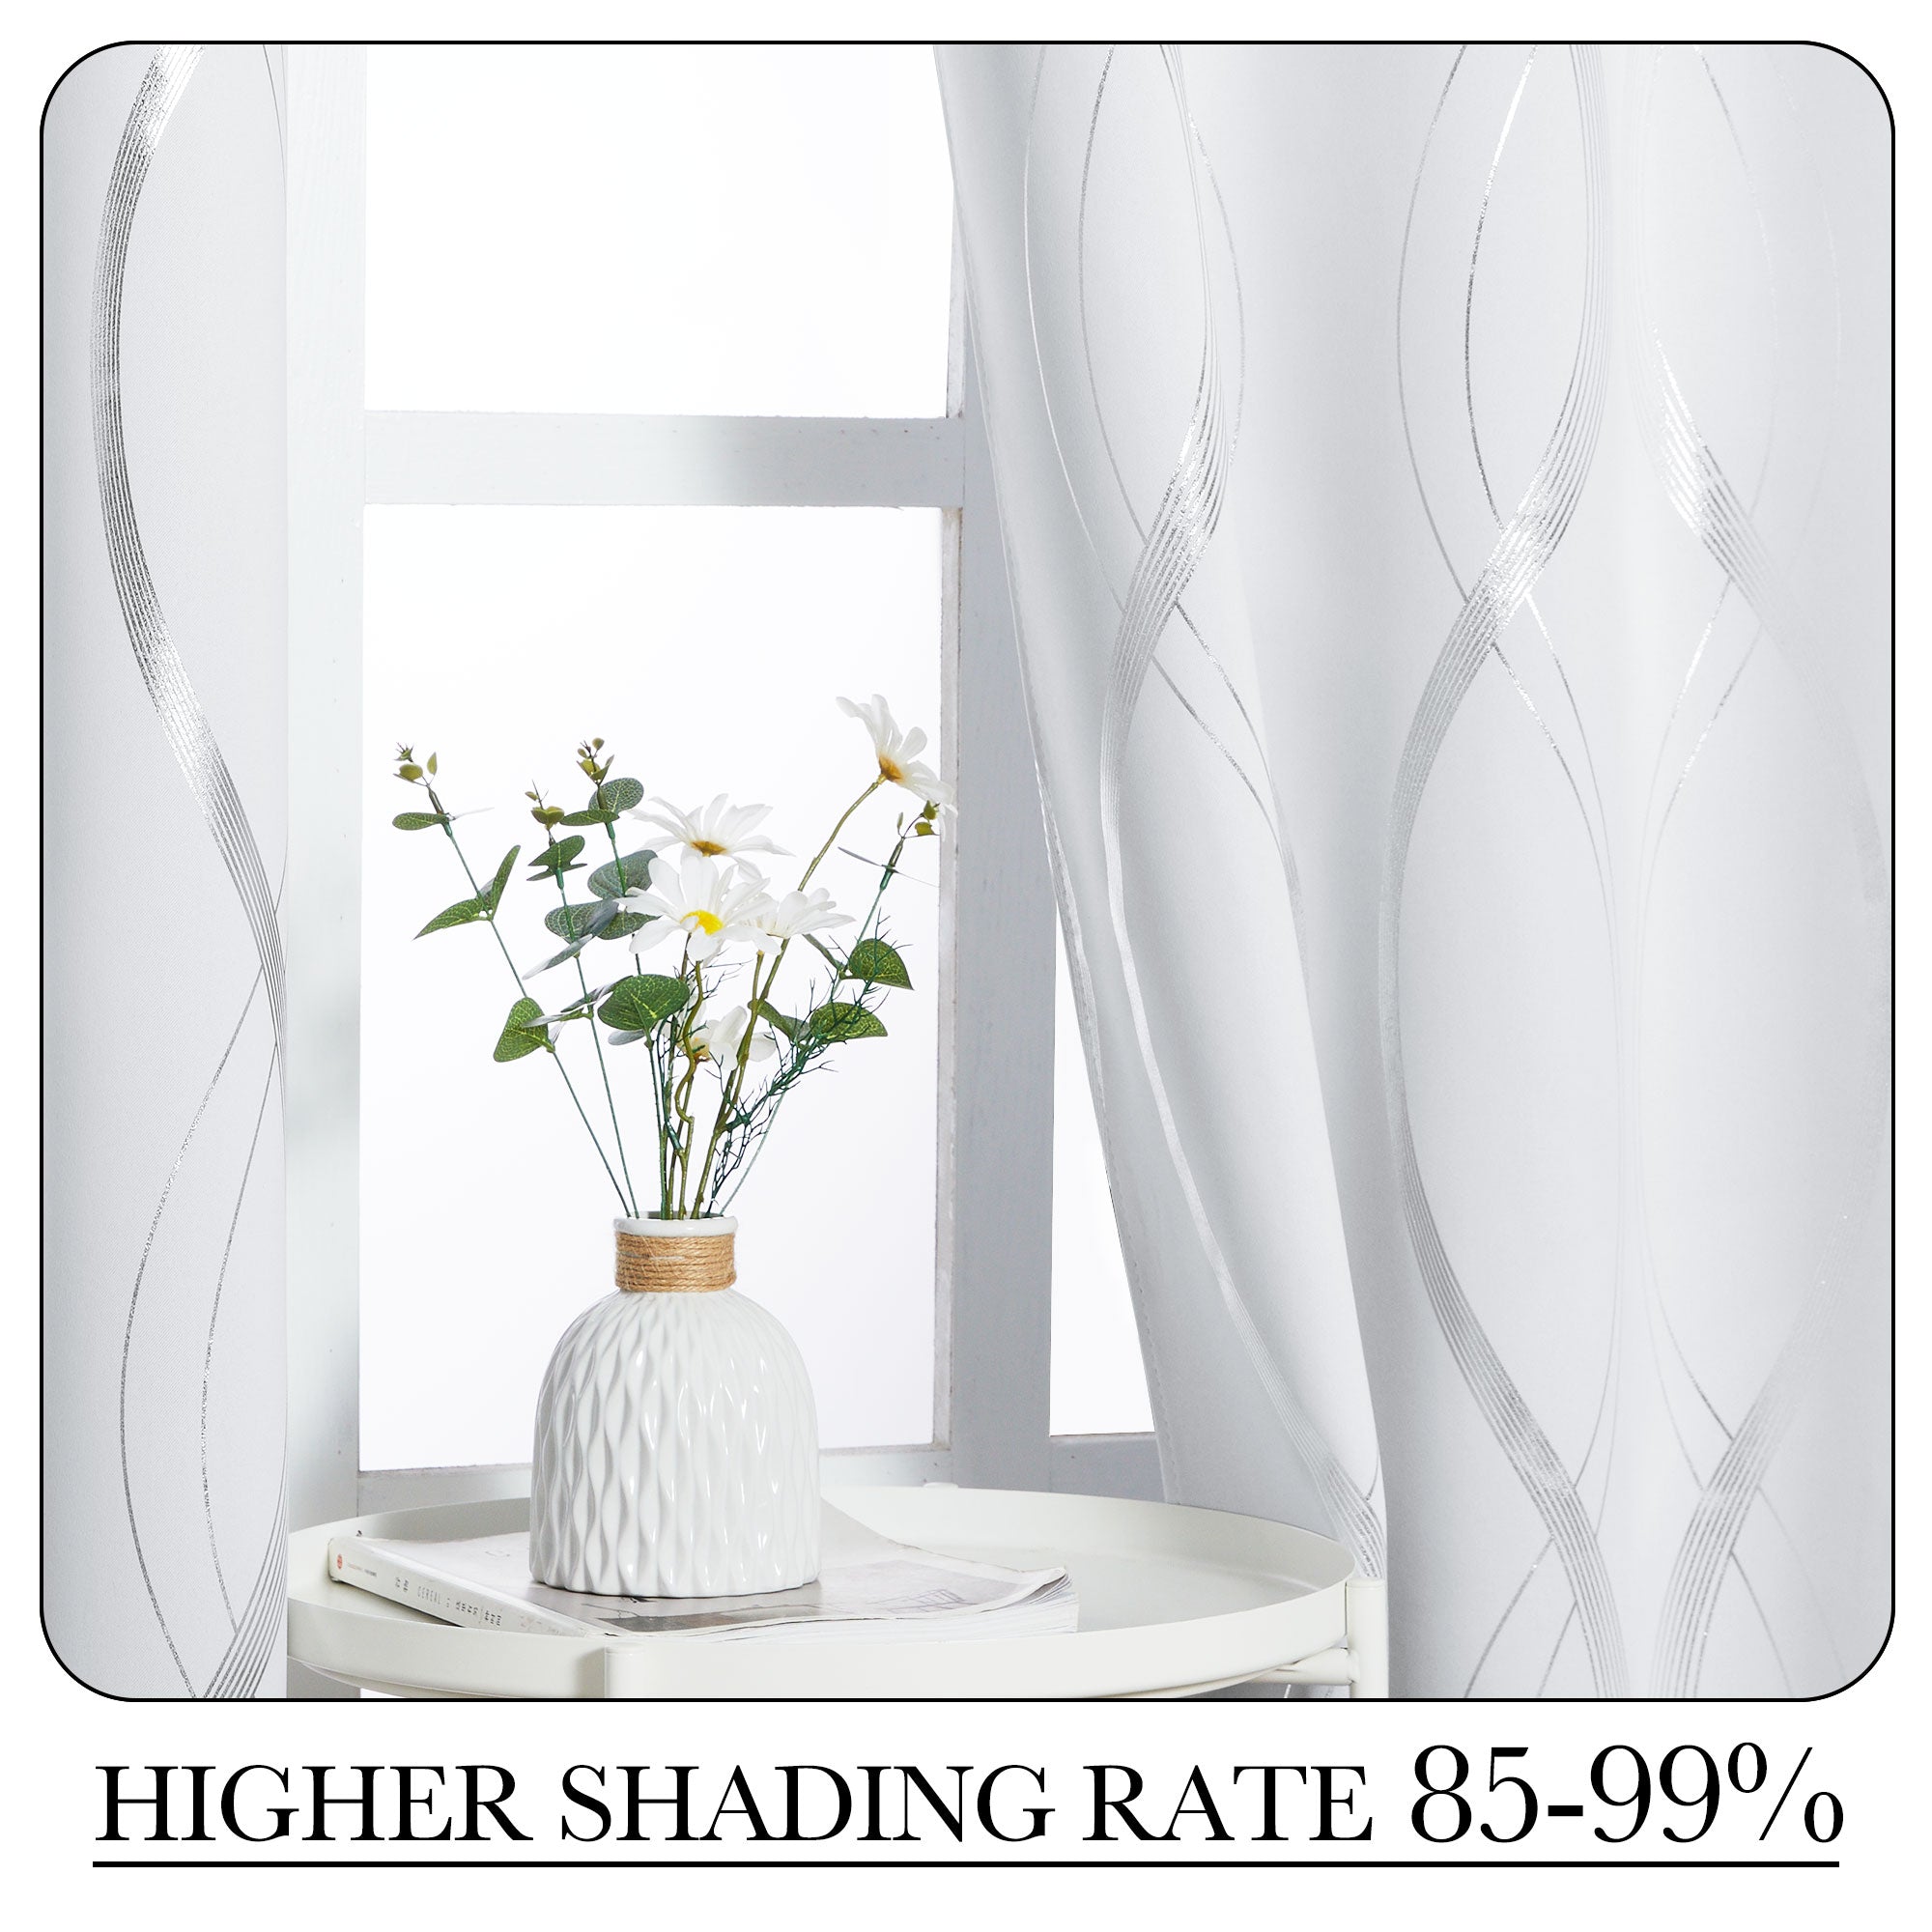 Silver Wave Printed Grommet Thermal Insulated Blackout Curtains For Living Room And Bedroom 2 Panels KGORGE Store